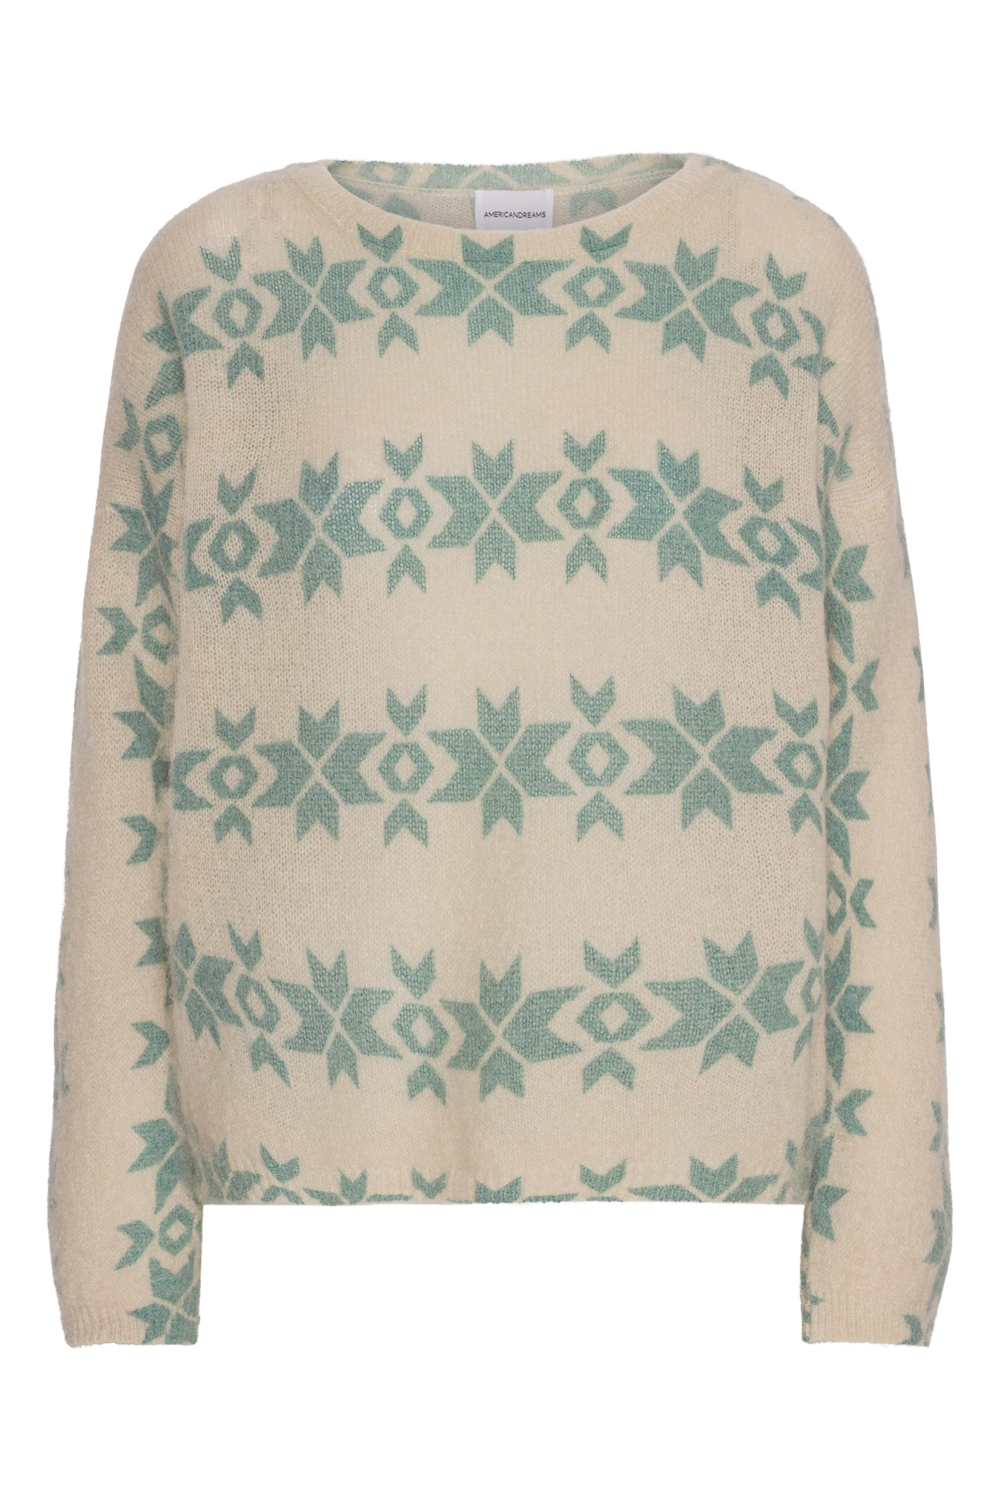 Eva Nordic Pullover Beige With Green Print - Sample